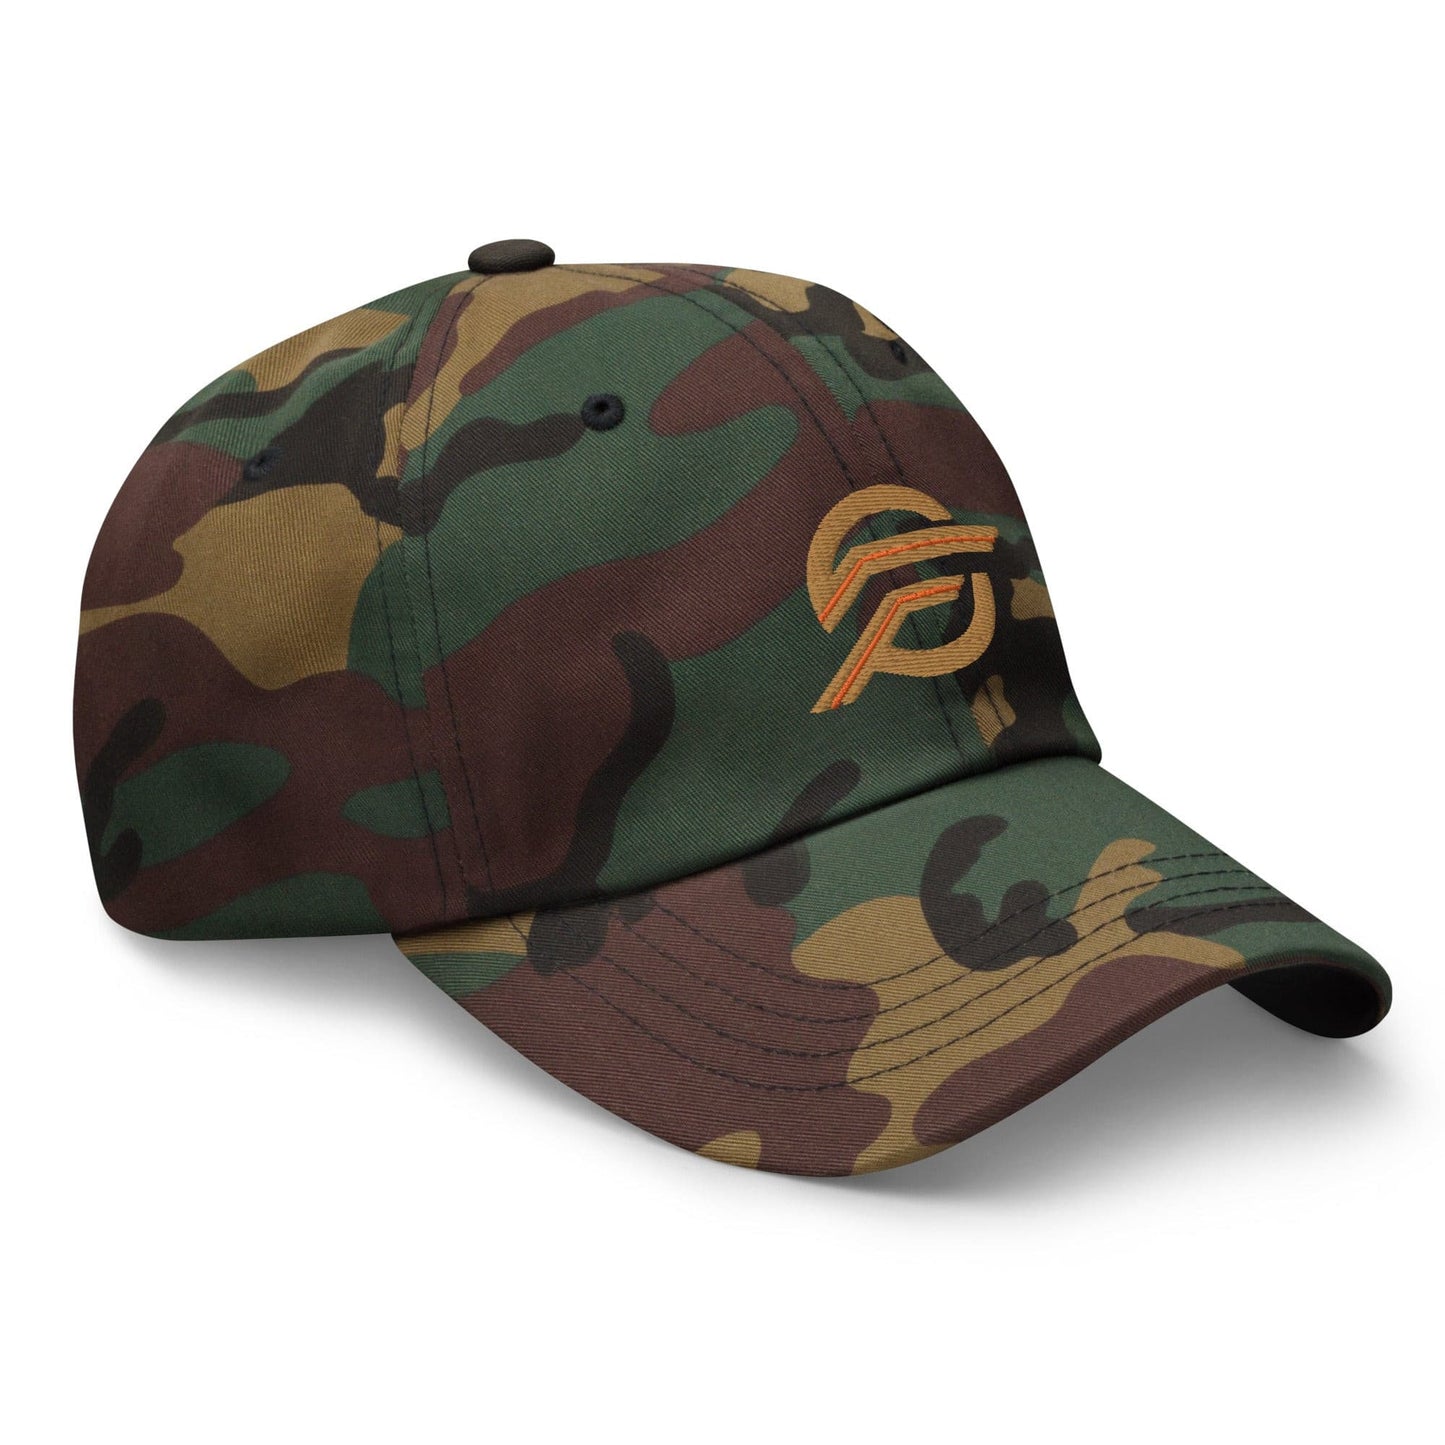 Embroidered logo Dad hat Camo